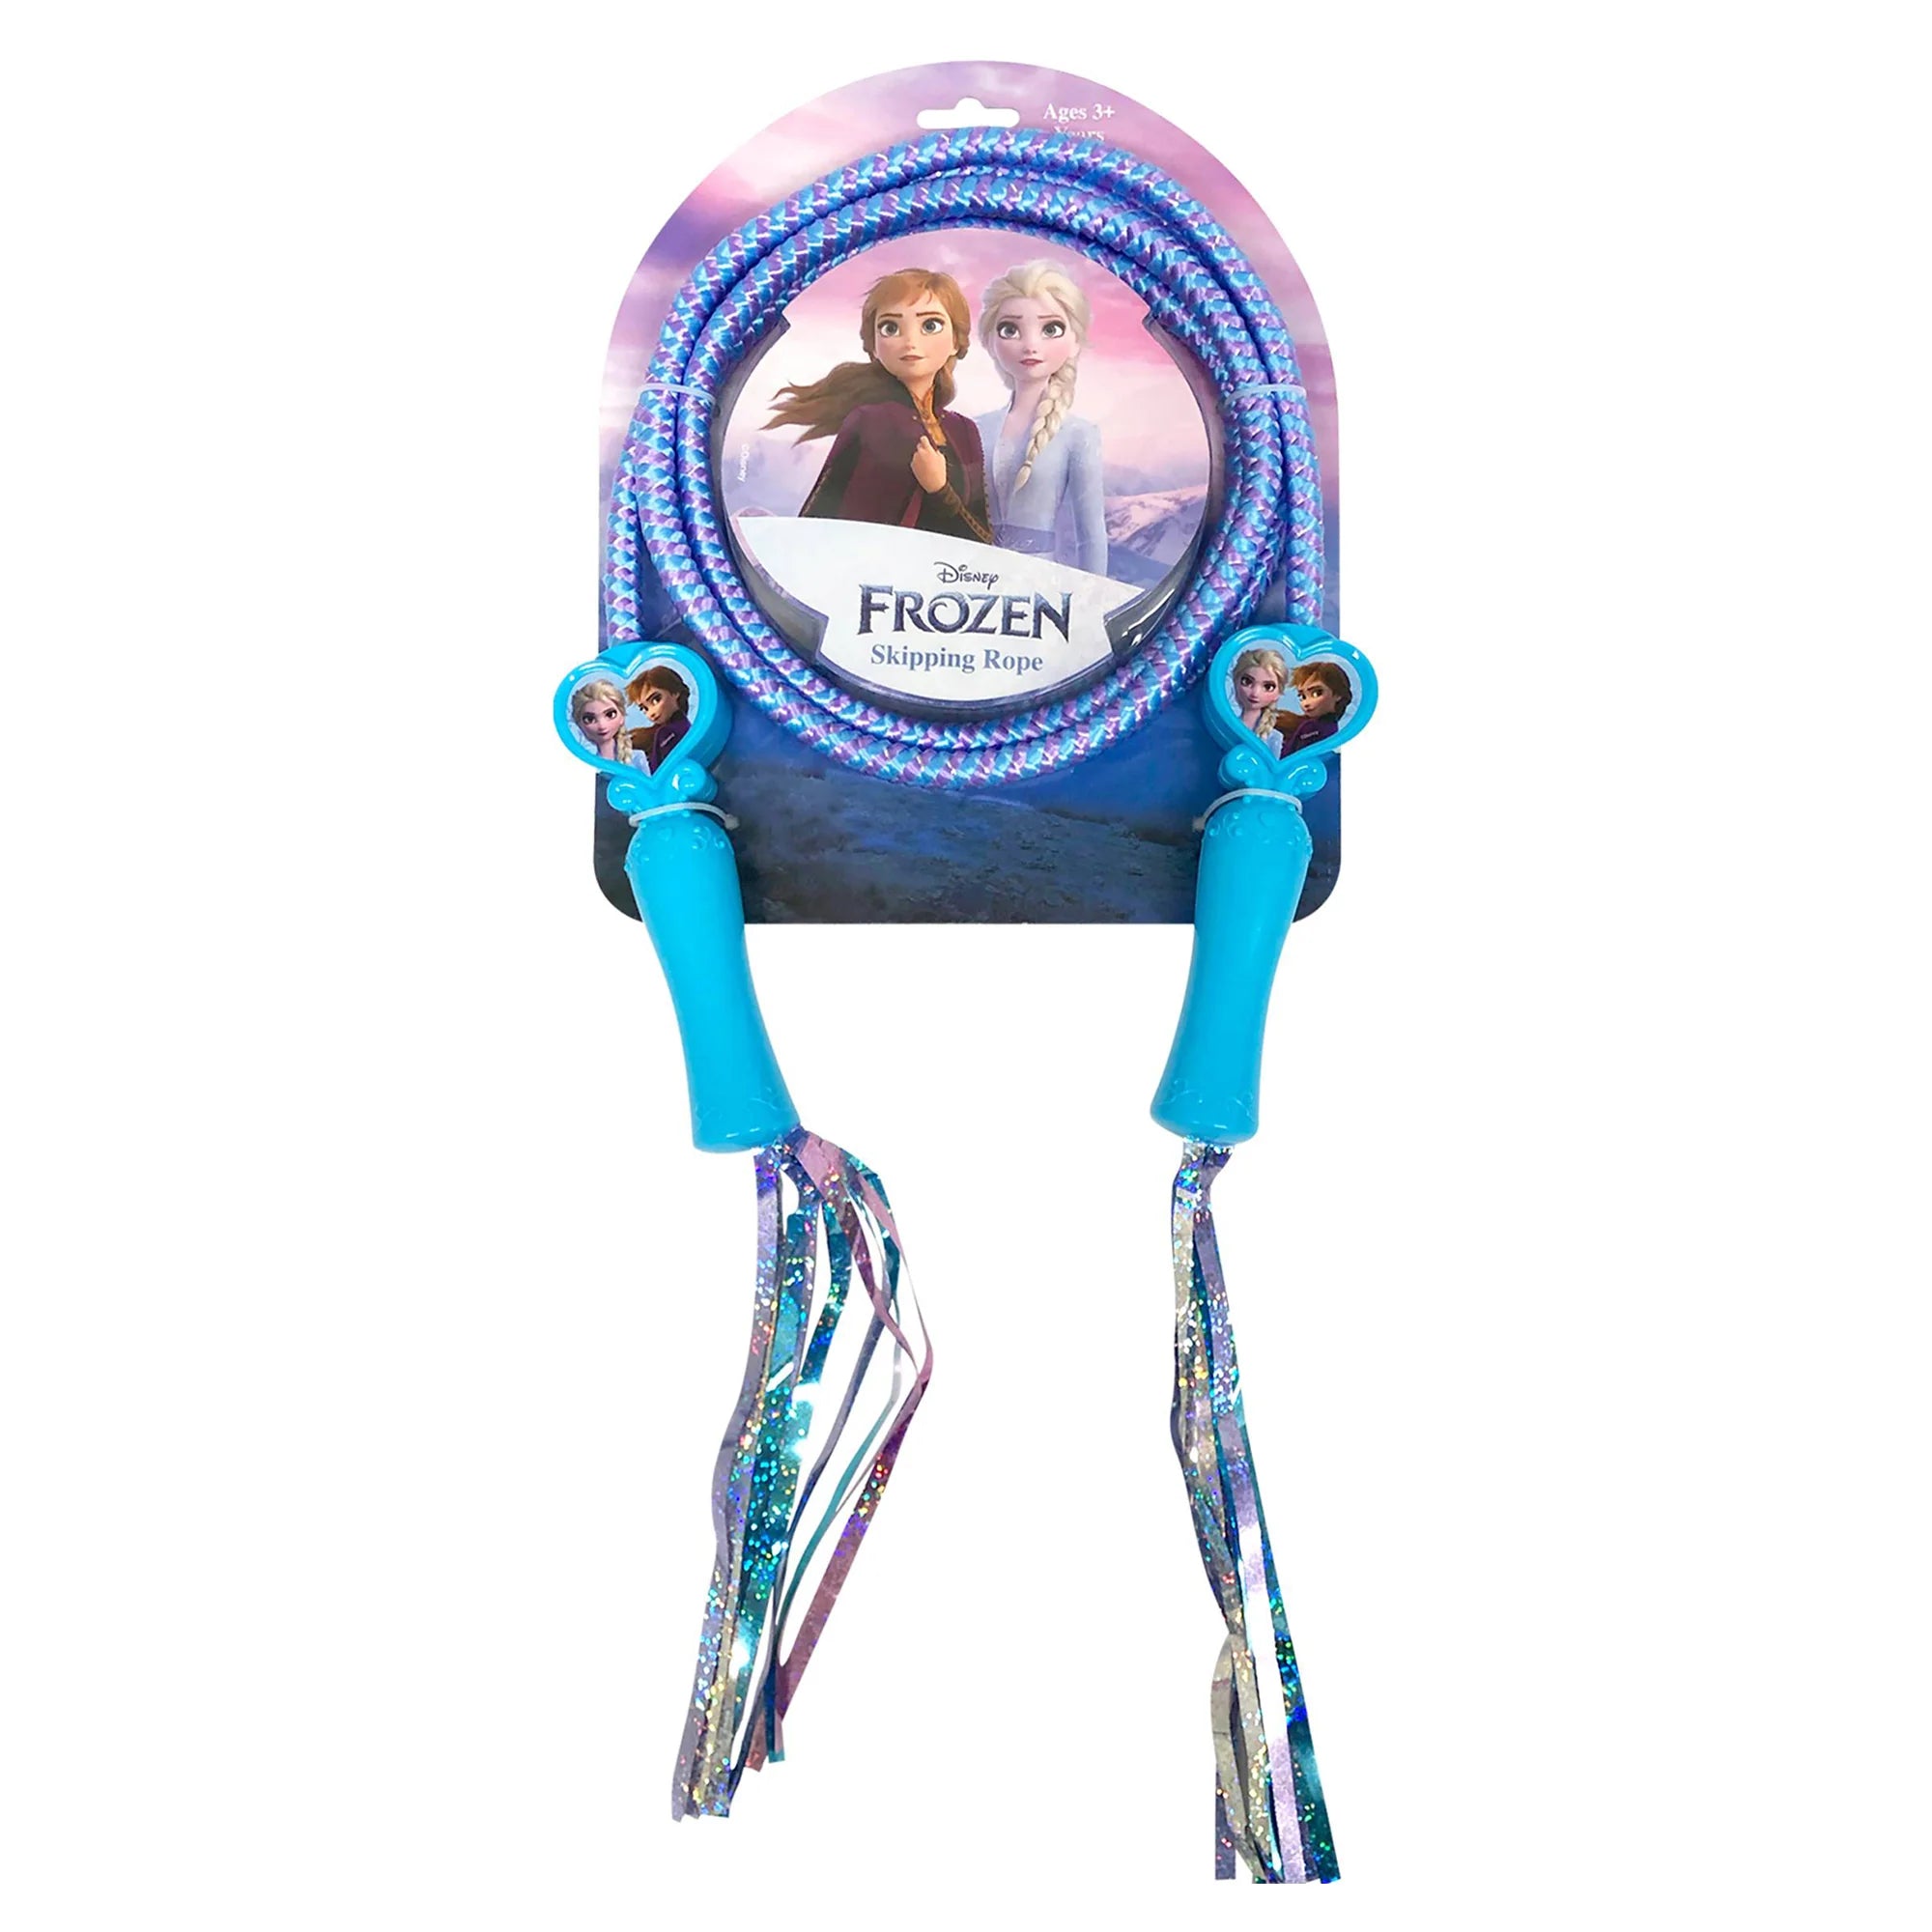 Deluxe Skipping Rope - Barbie or Frozen